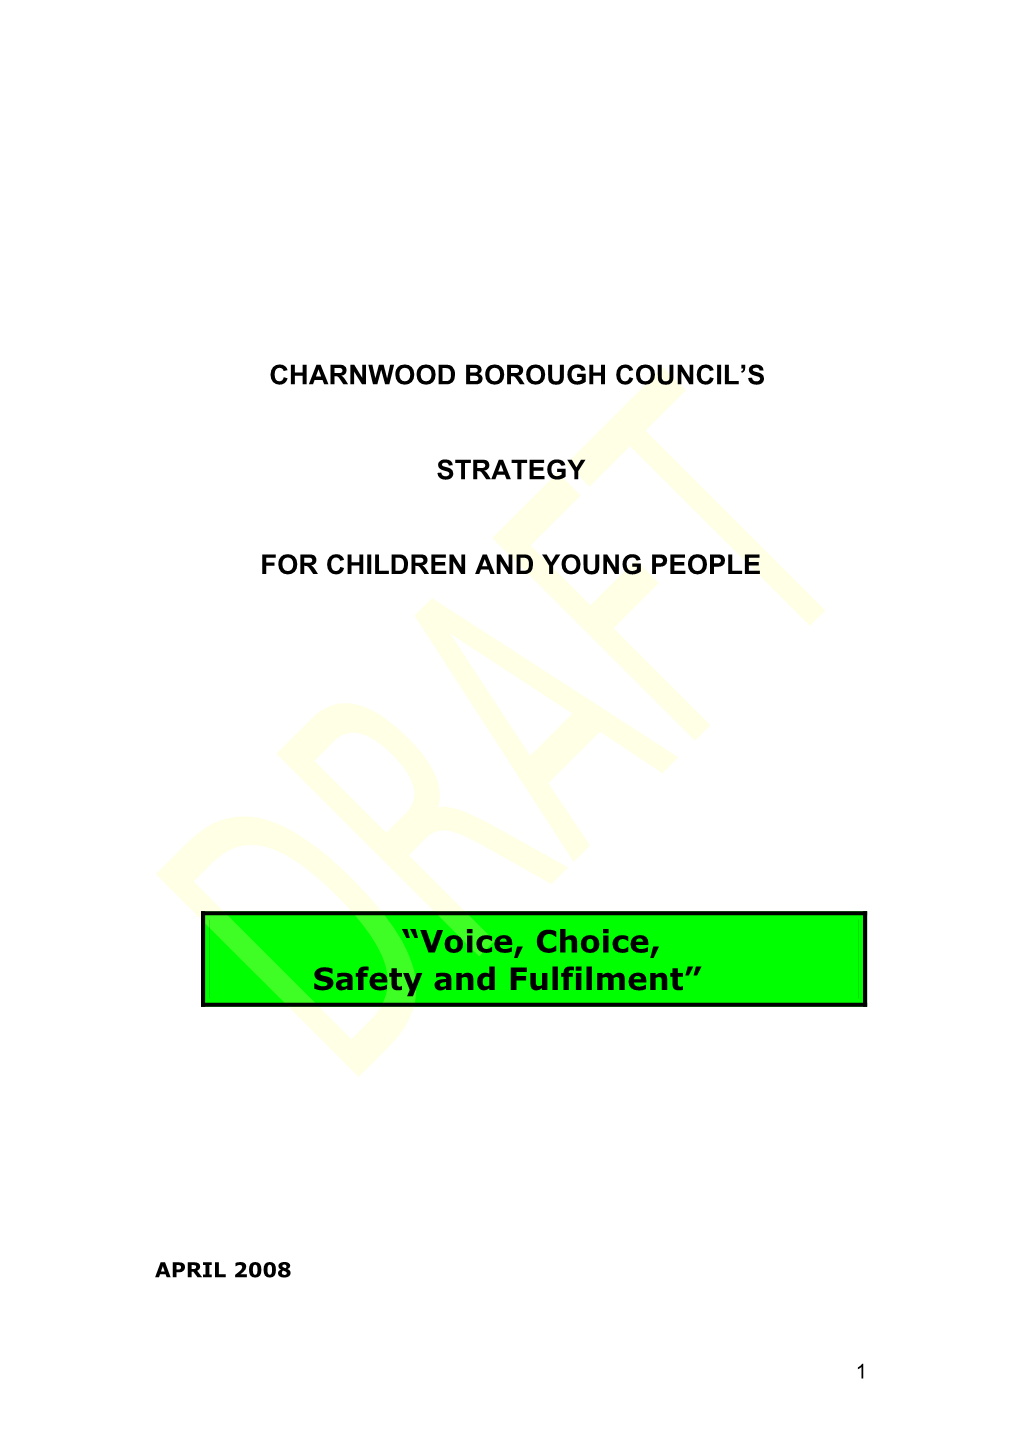 Hinckley and Bosworth Borough Council Vision for Children and Young People